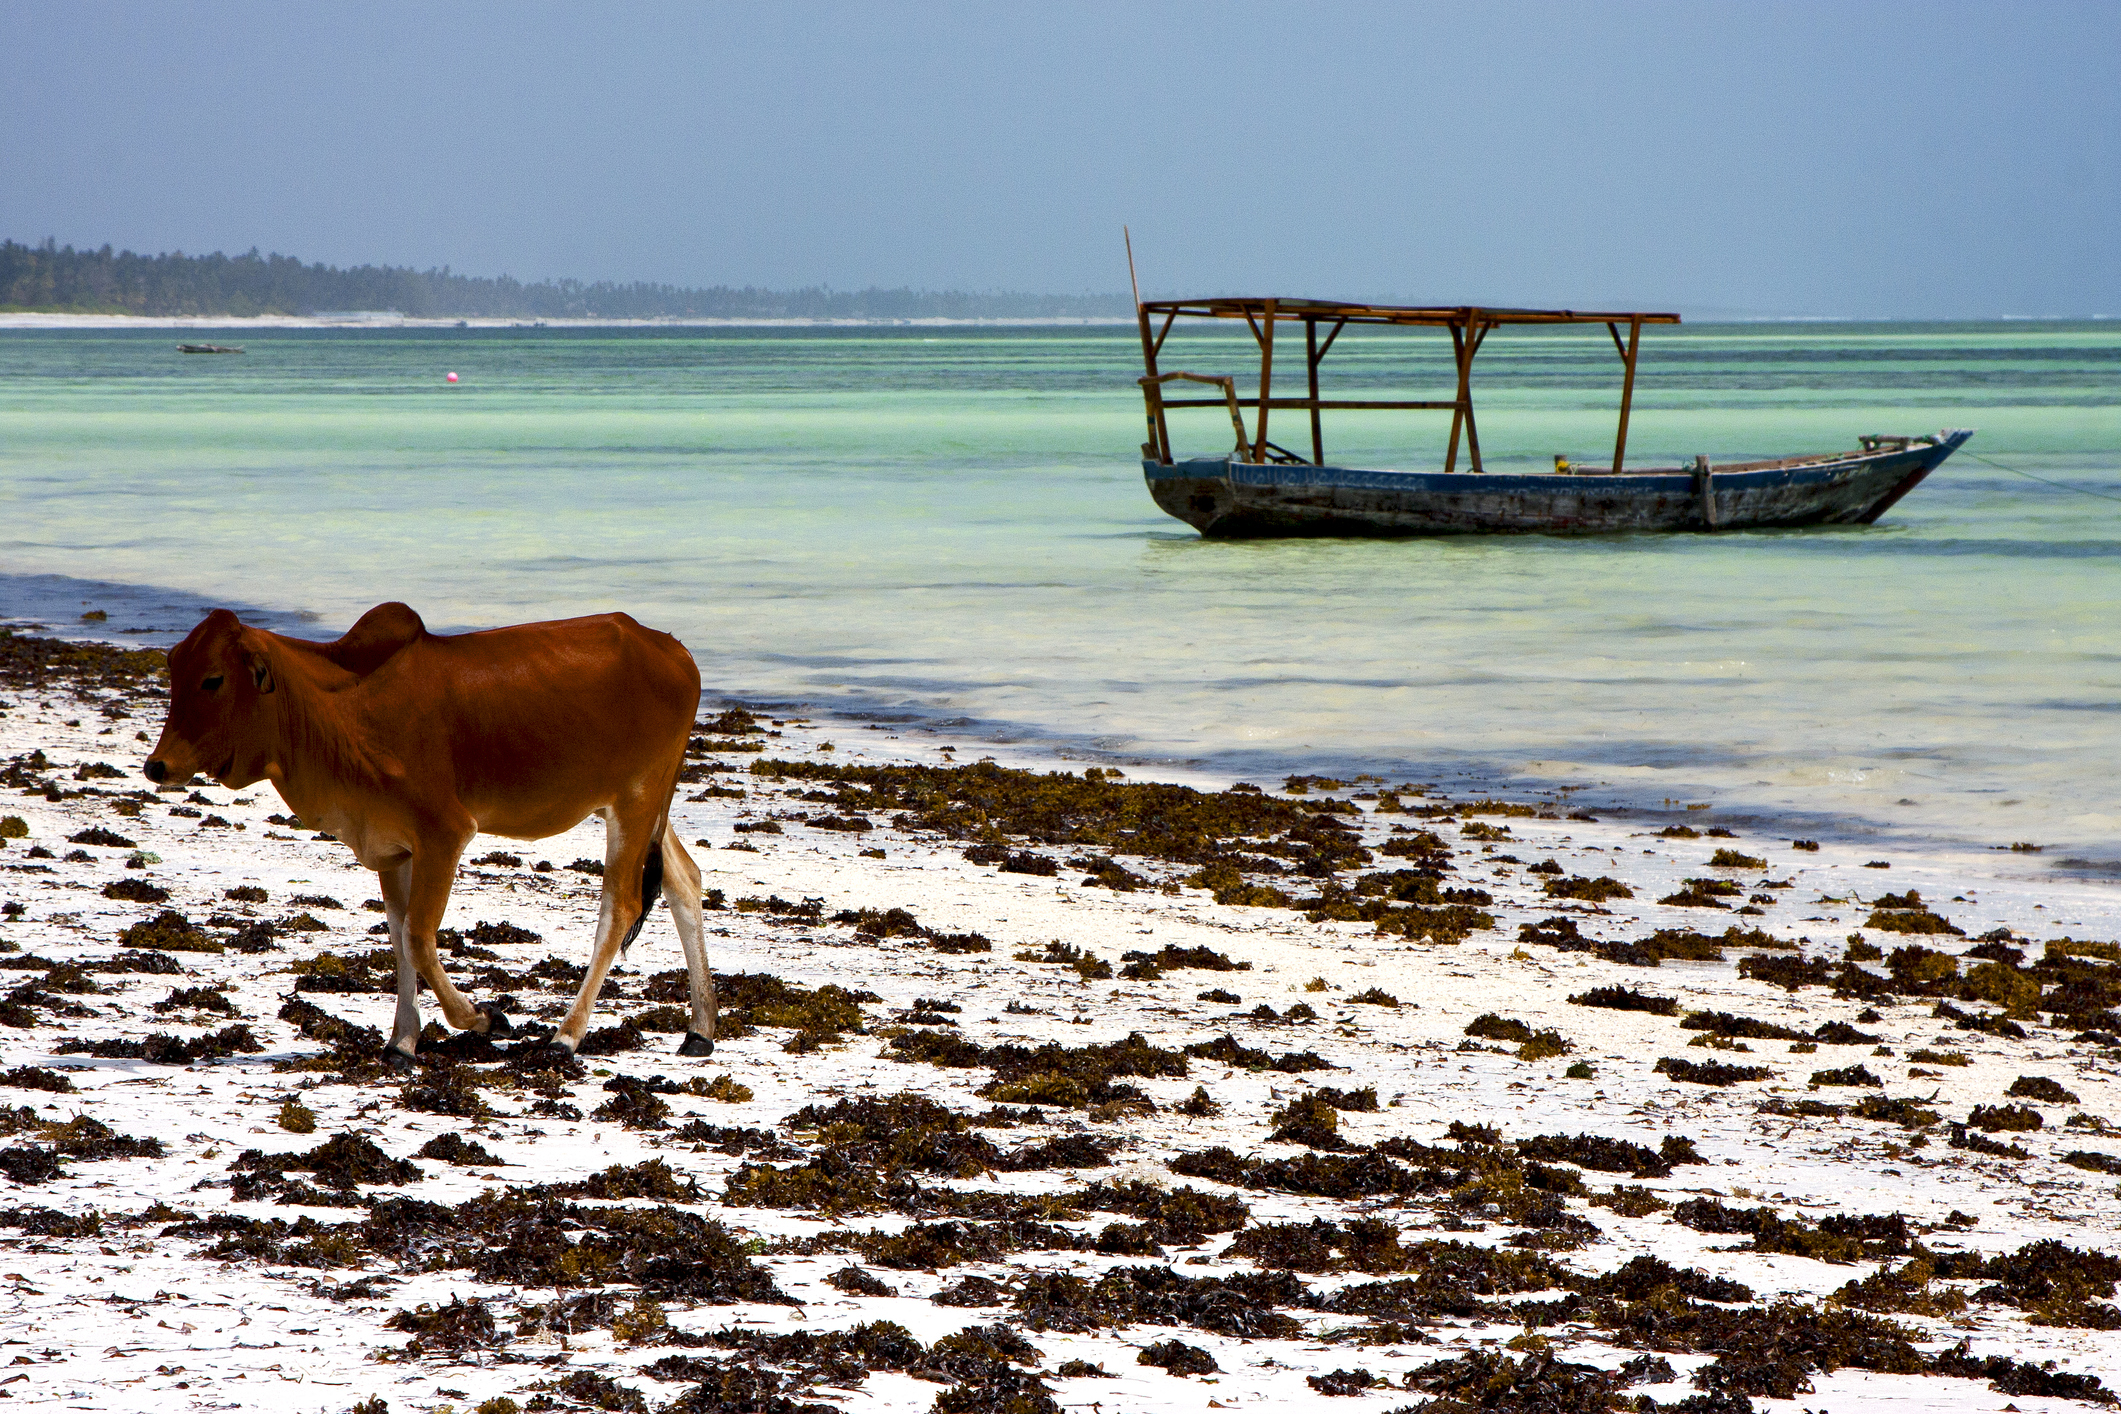 This cow—on a beach in Zanzibar—was not part of the methane emissions study, and may or may not be a seaweed eater. (Getty Images/iStockphoto)